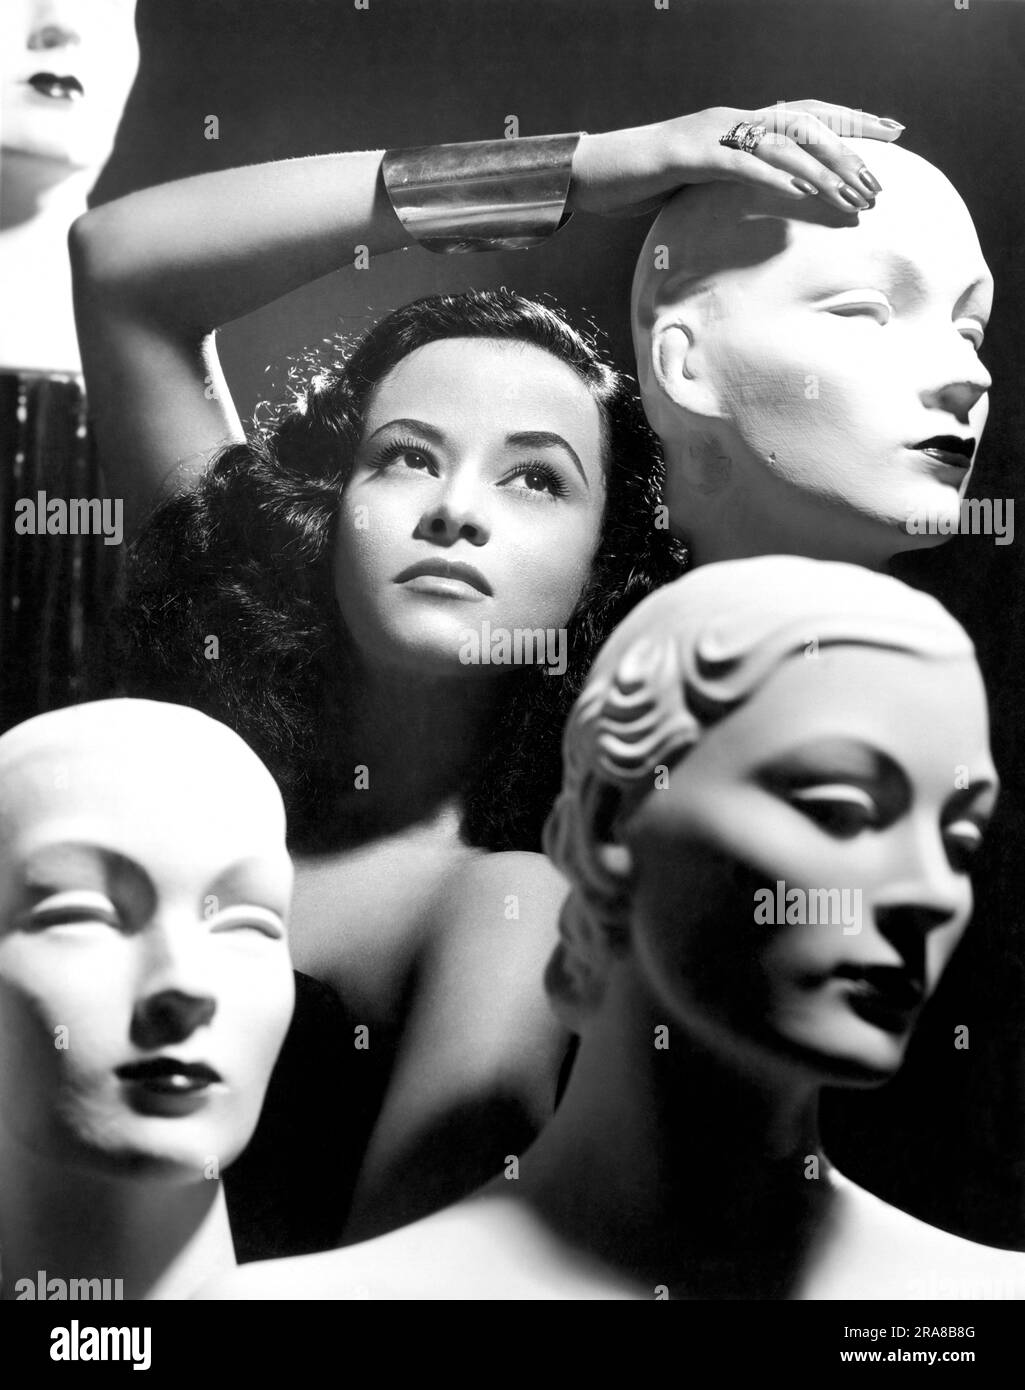 Black and white mannequin stand in free straight pose. 3D rendering on  isolated background Stock Photo - Alamy